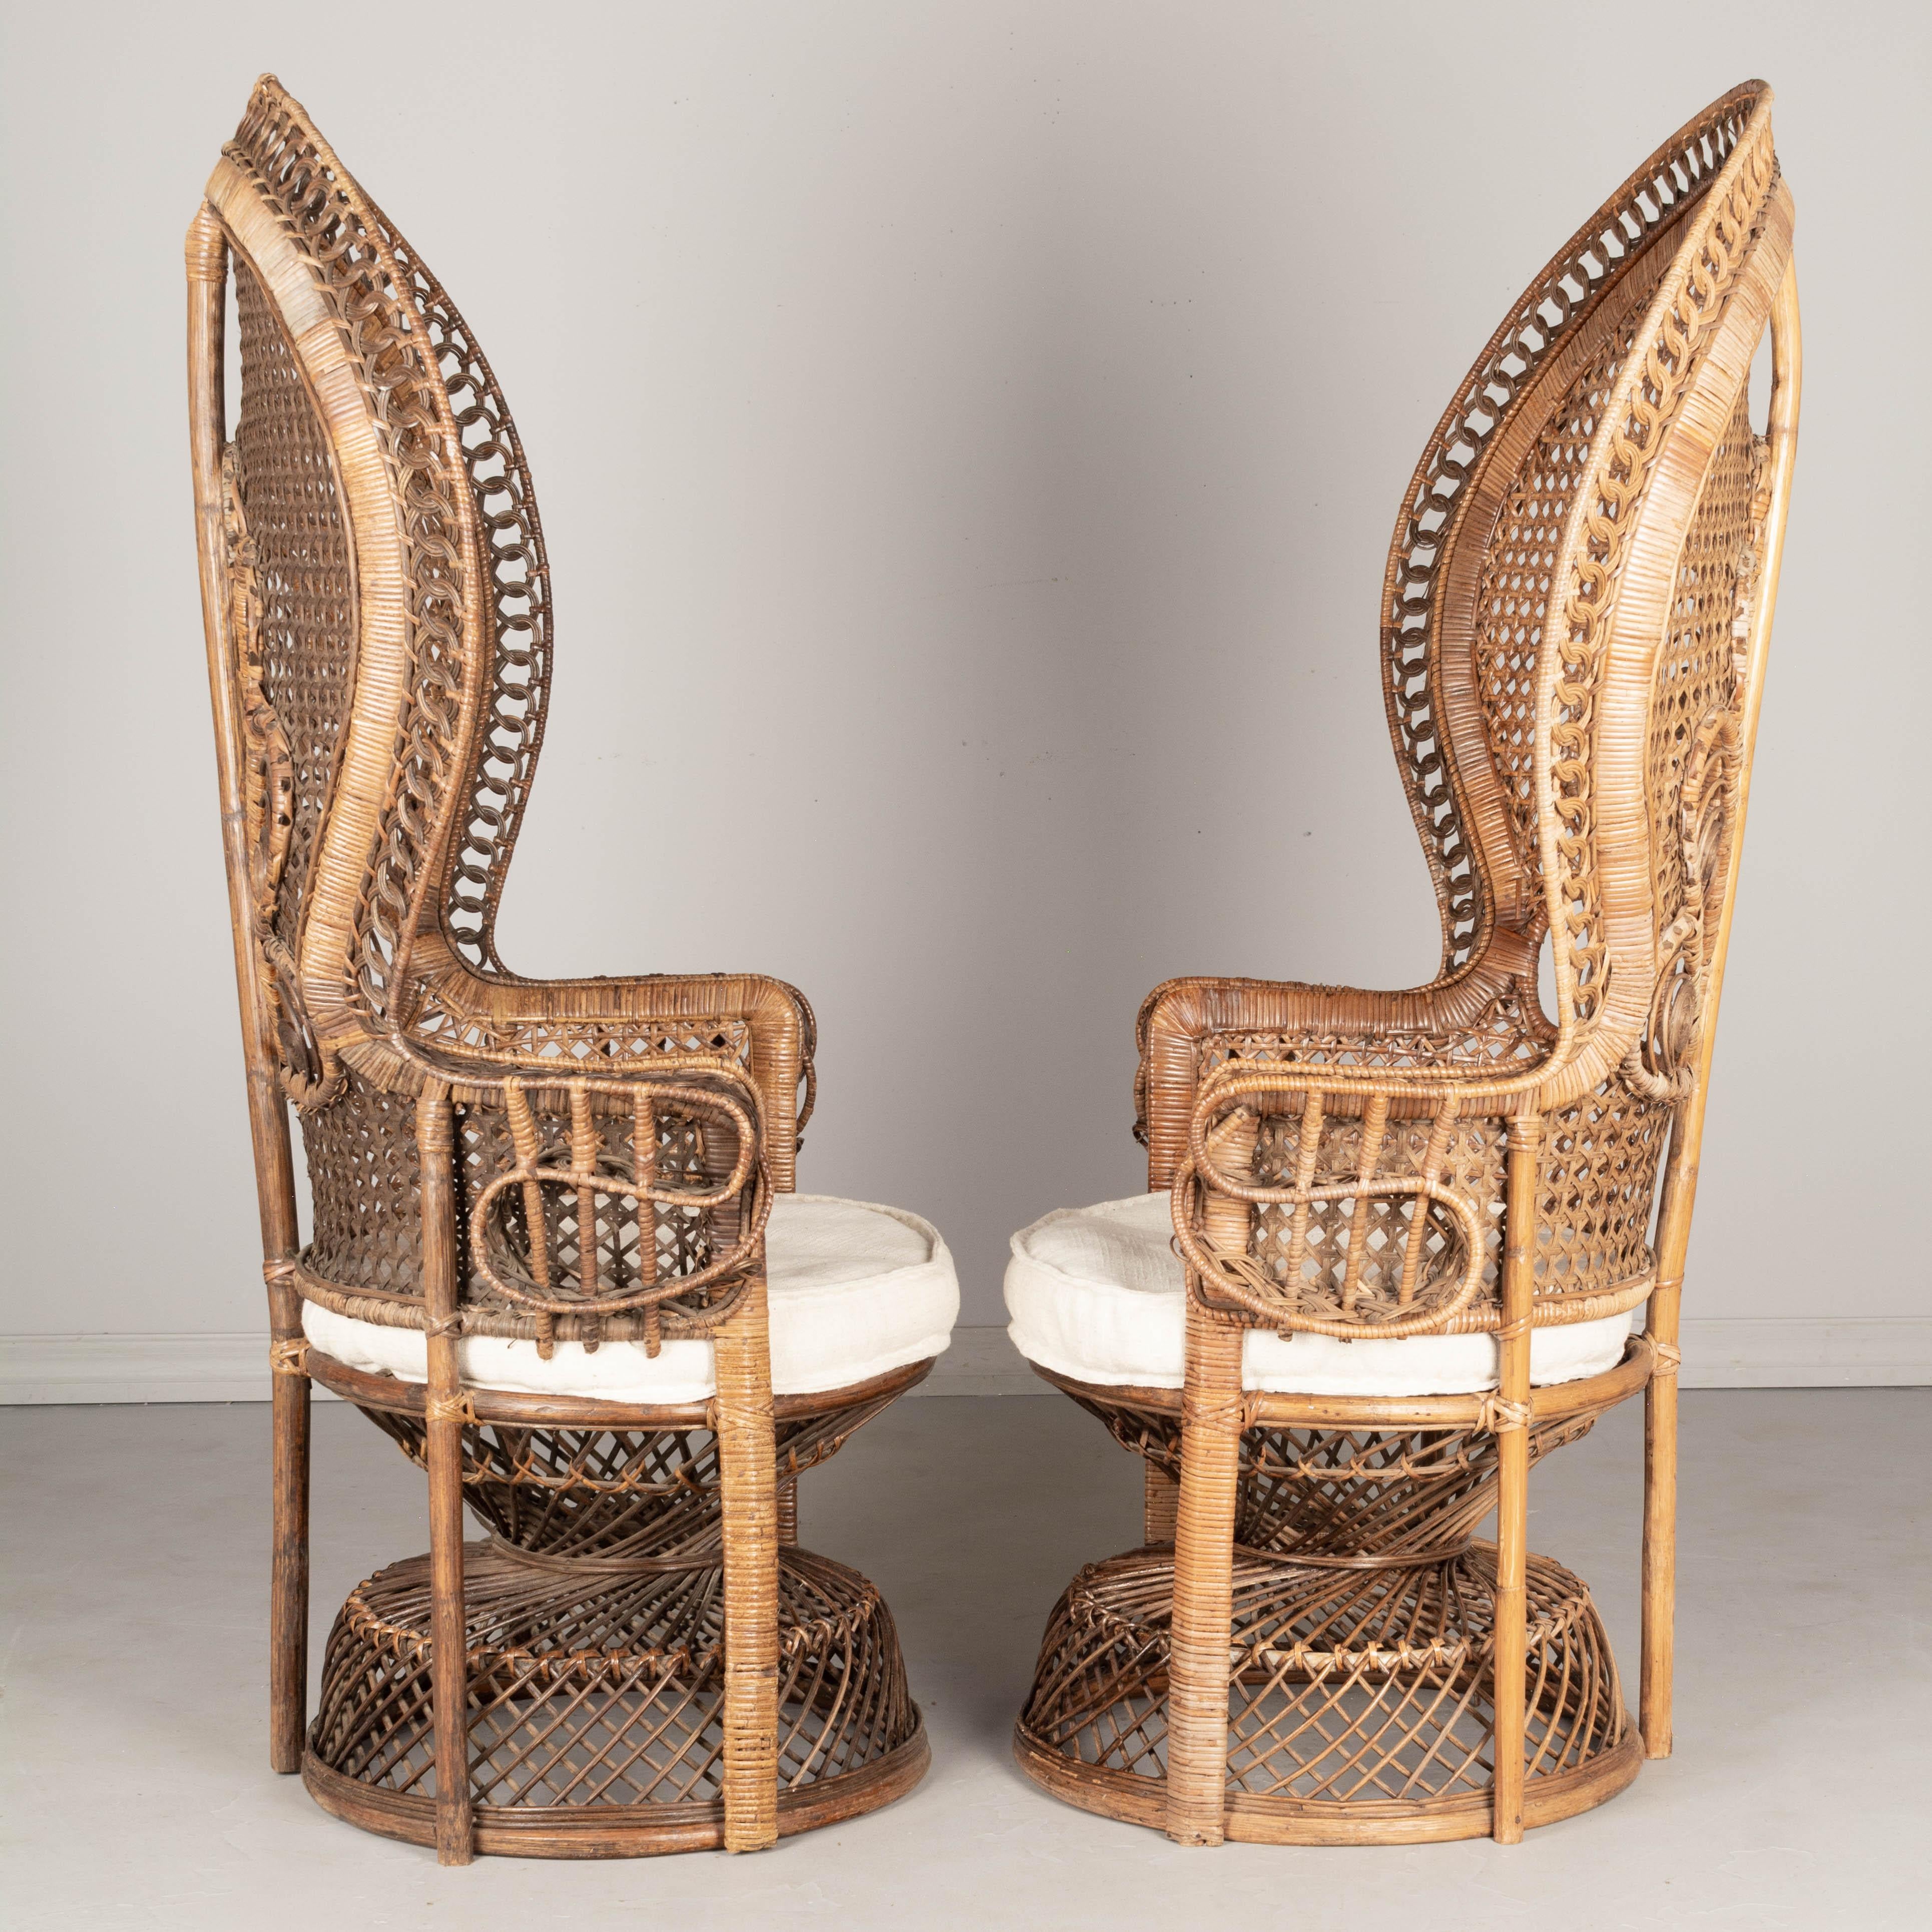 Hand-Crafted Vintage French Emmanuelle Rattan Peacock Fan Chairs, a Pair